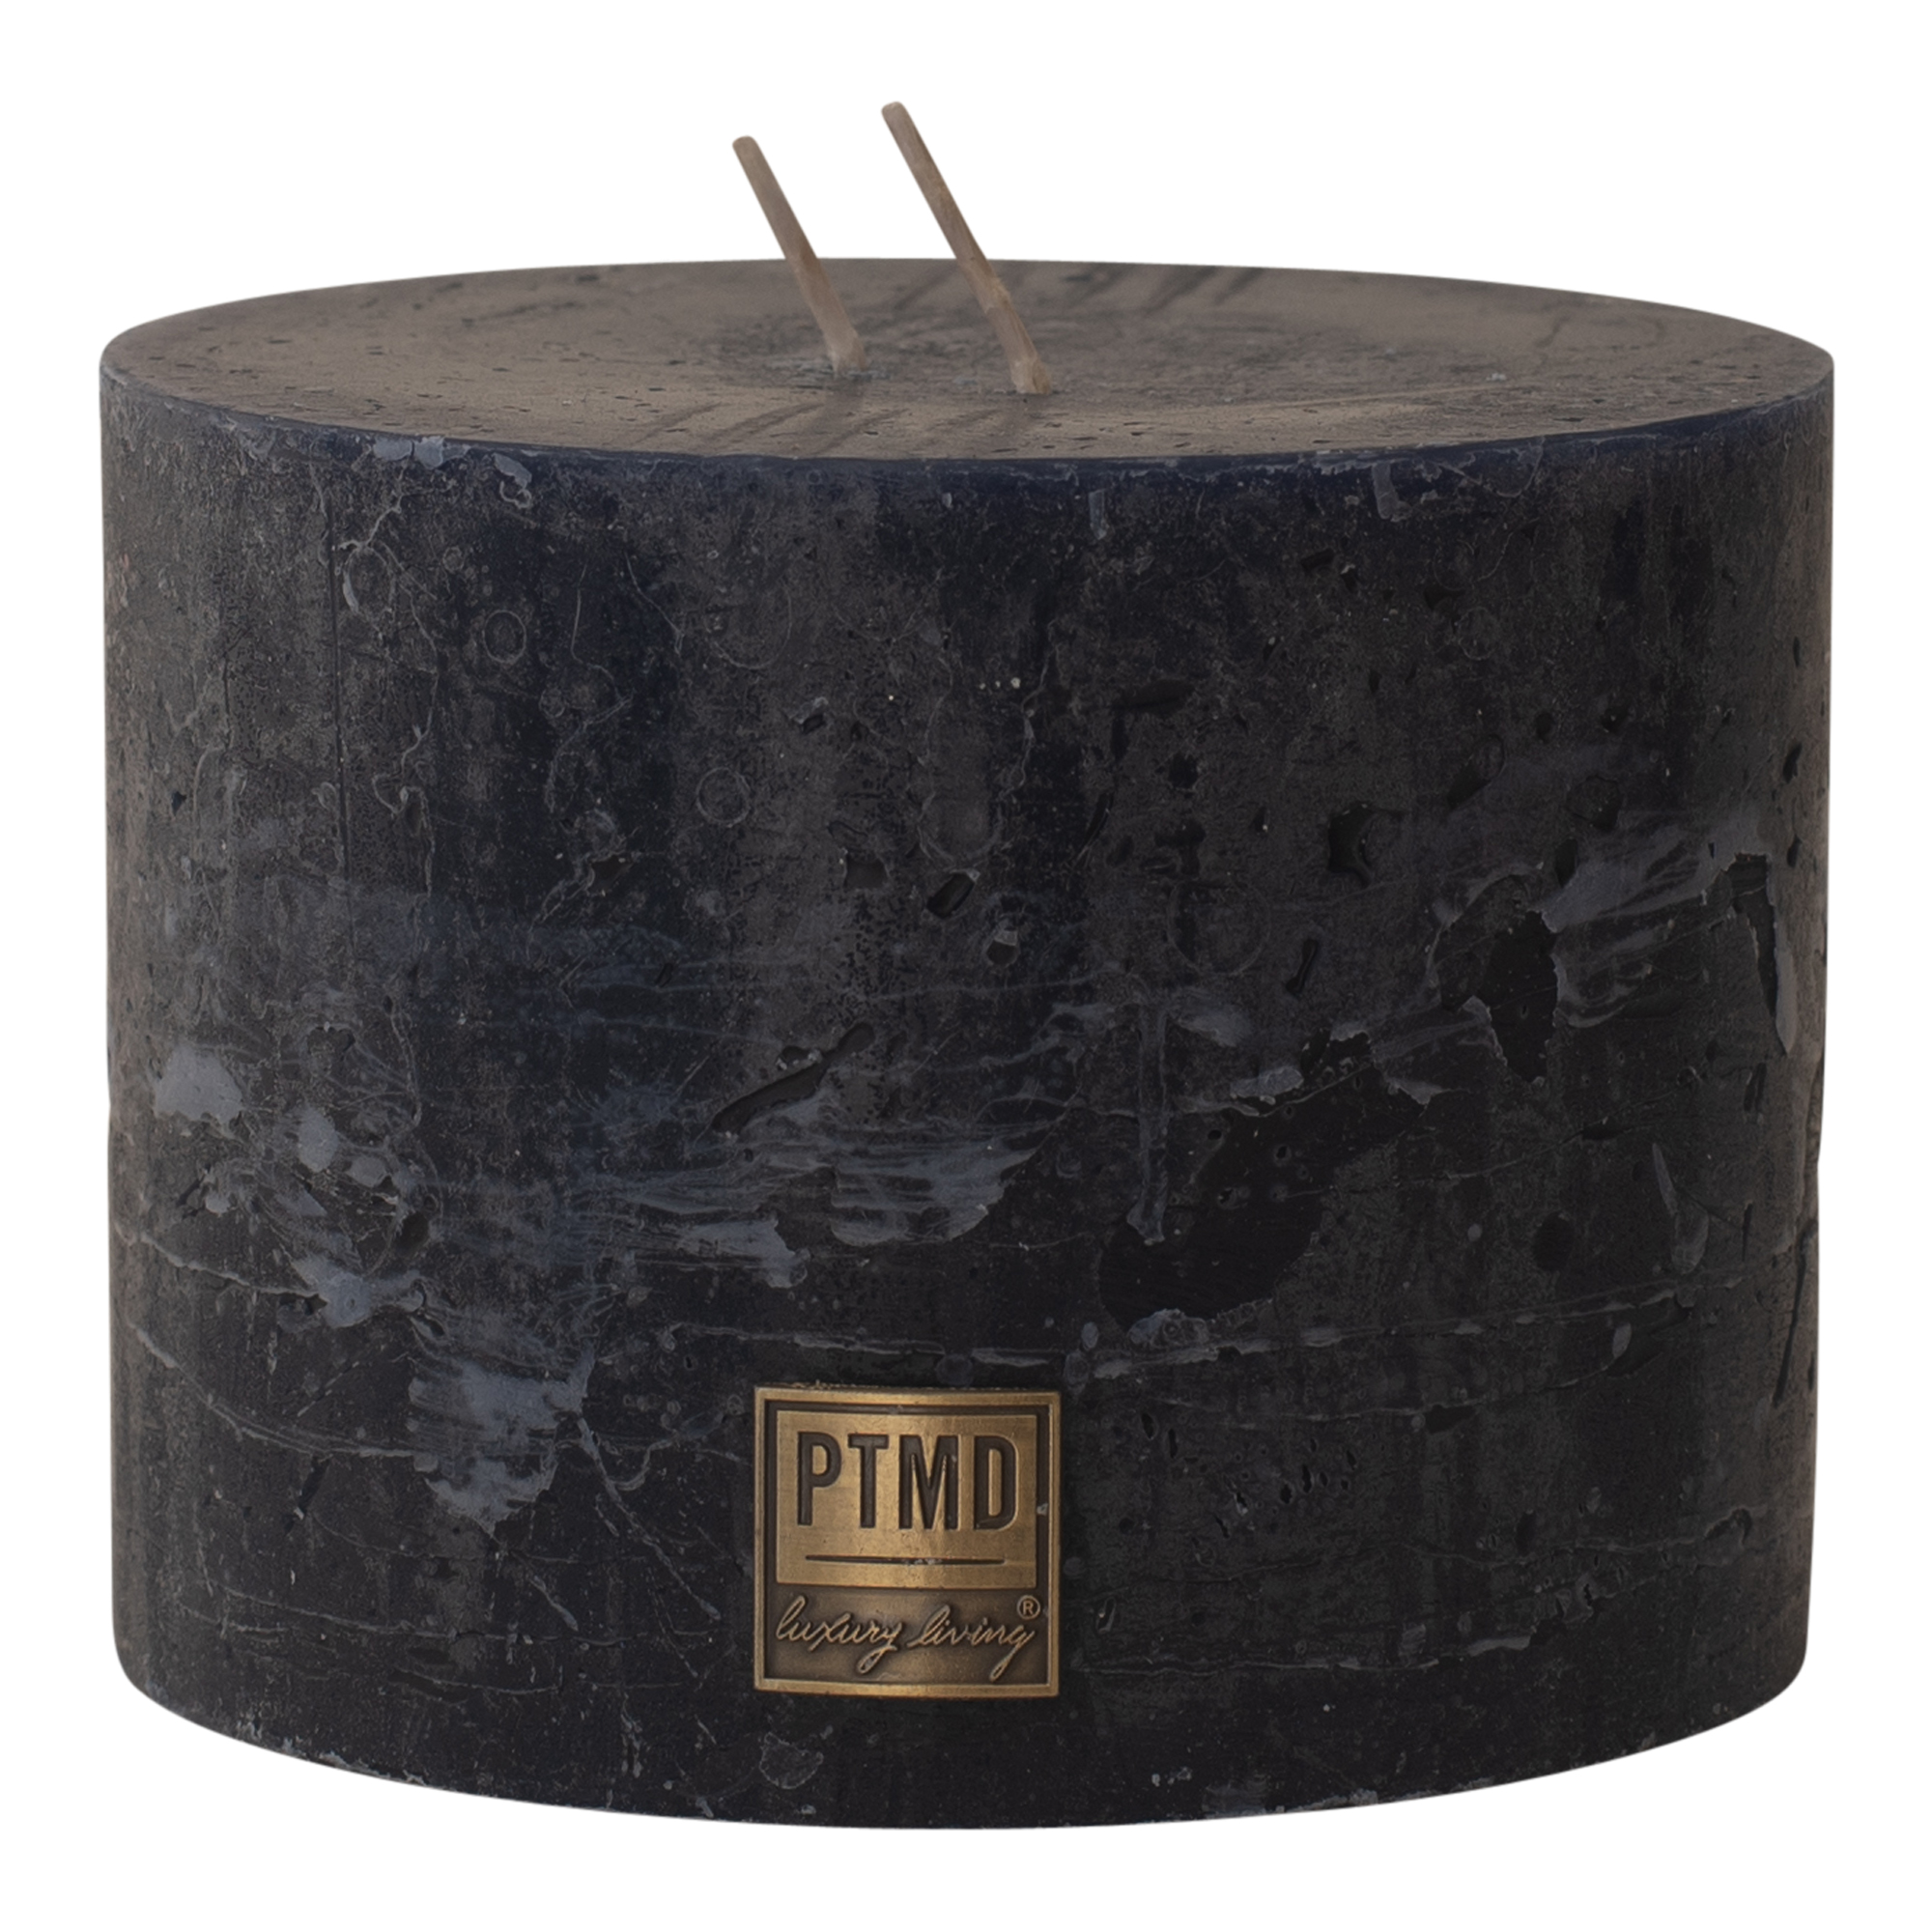 PTMD 9 x 12cm Night Blue Wax Rustic Block Candle